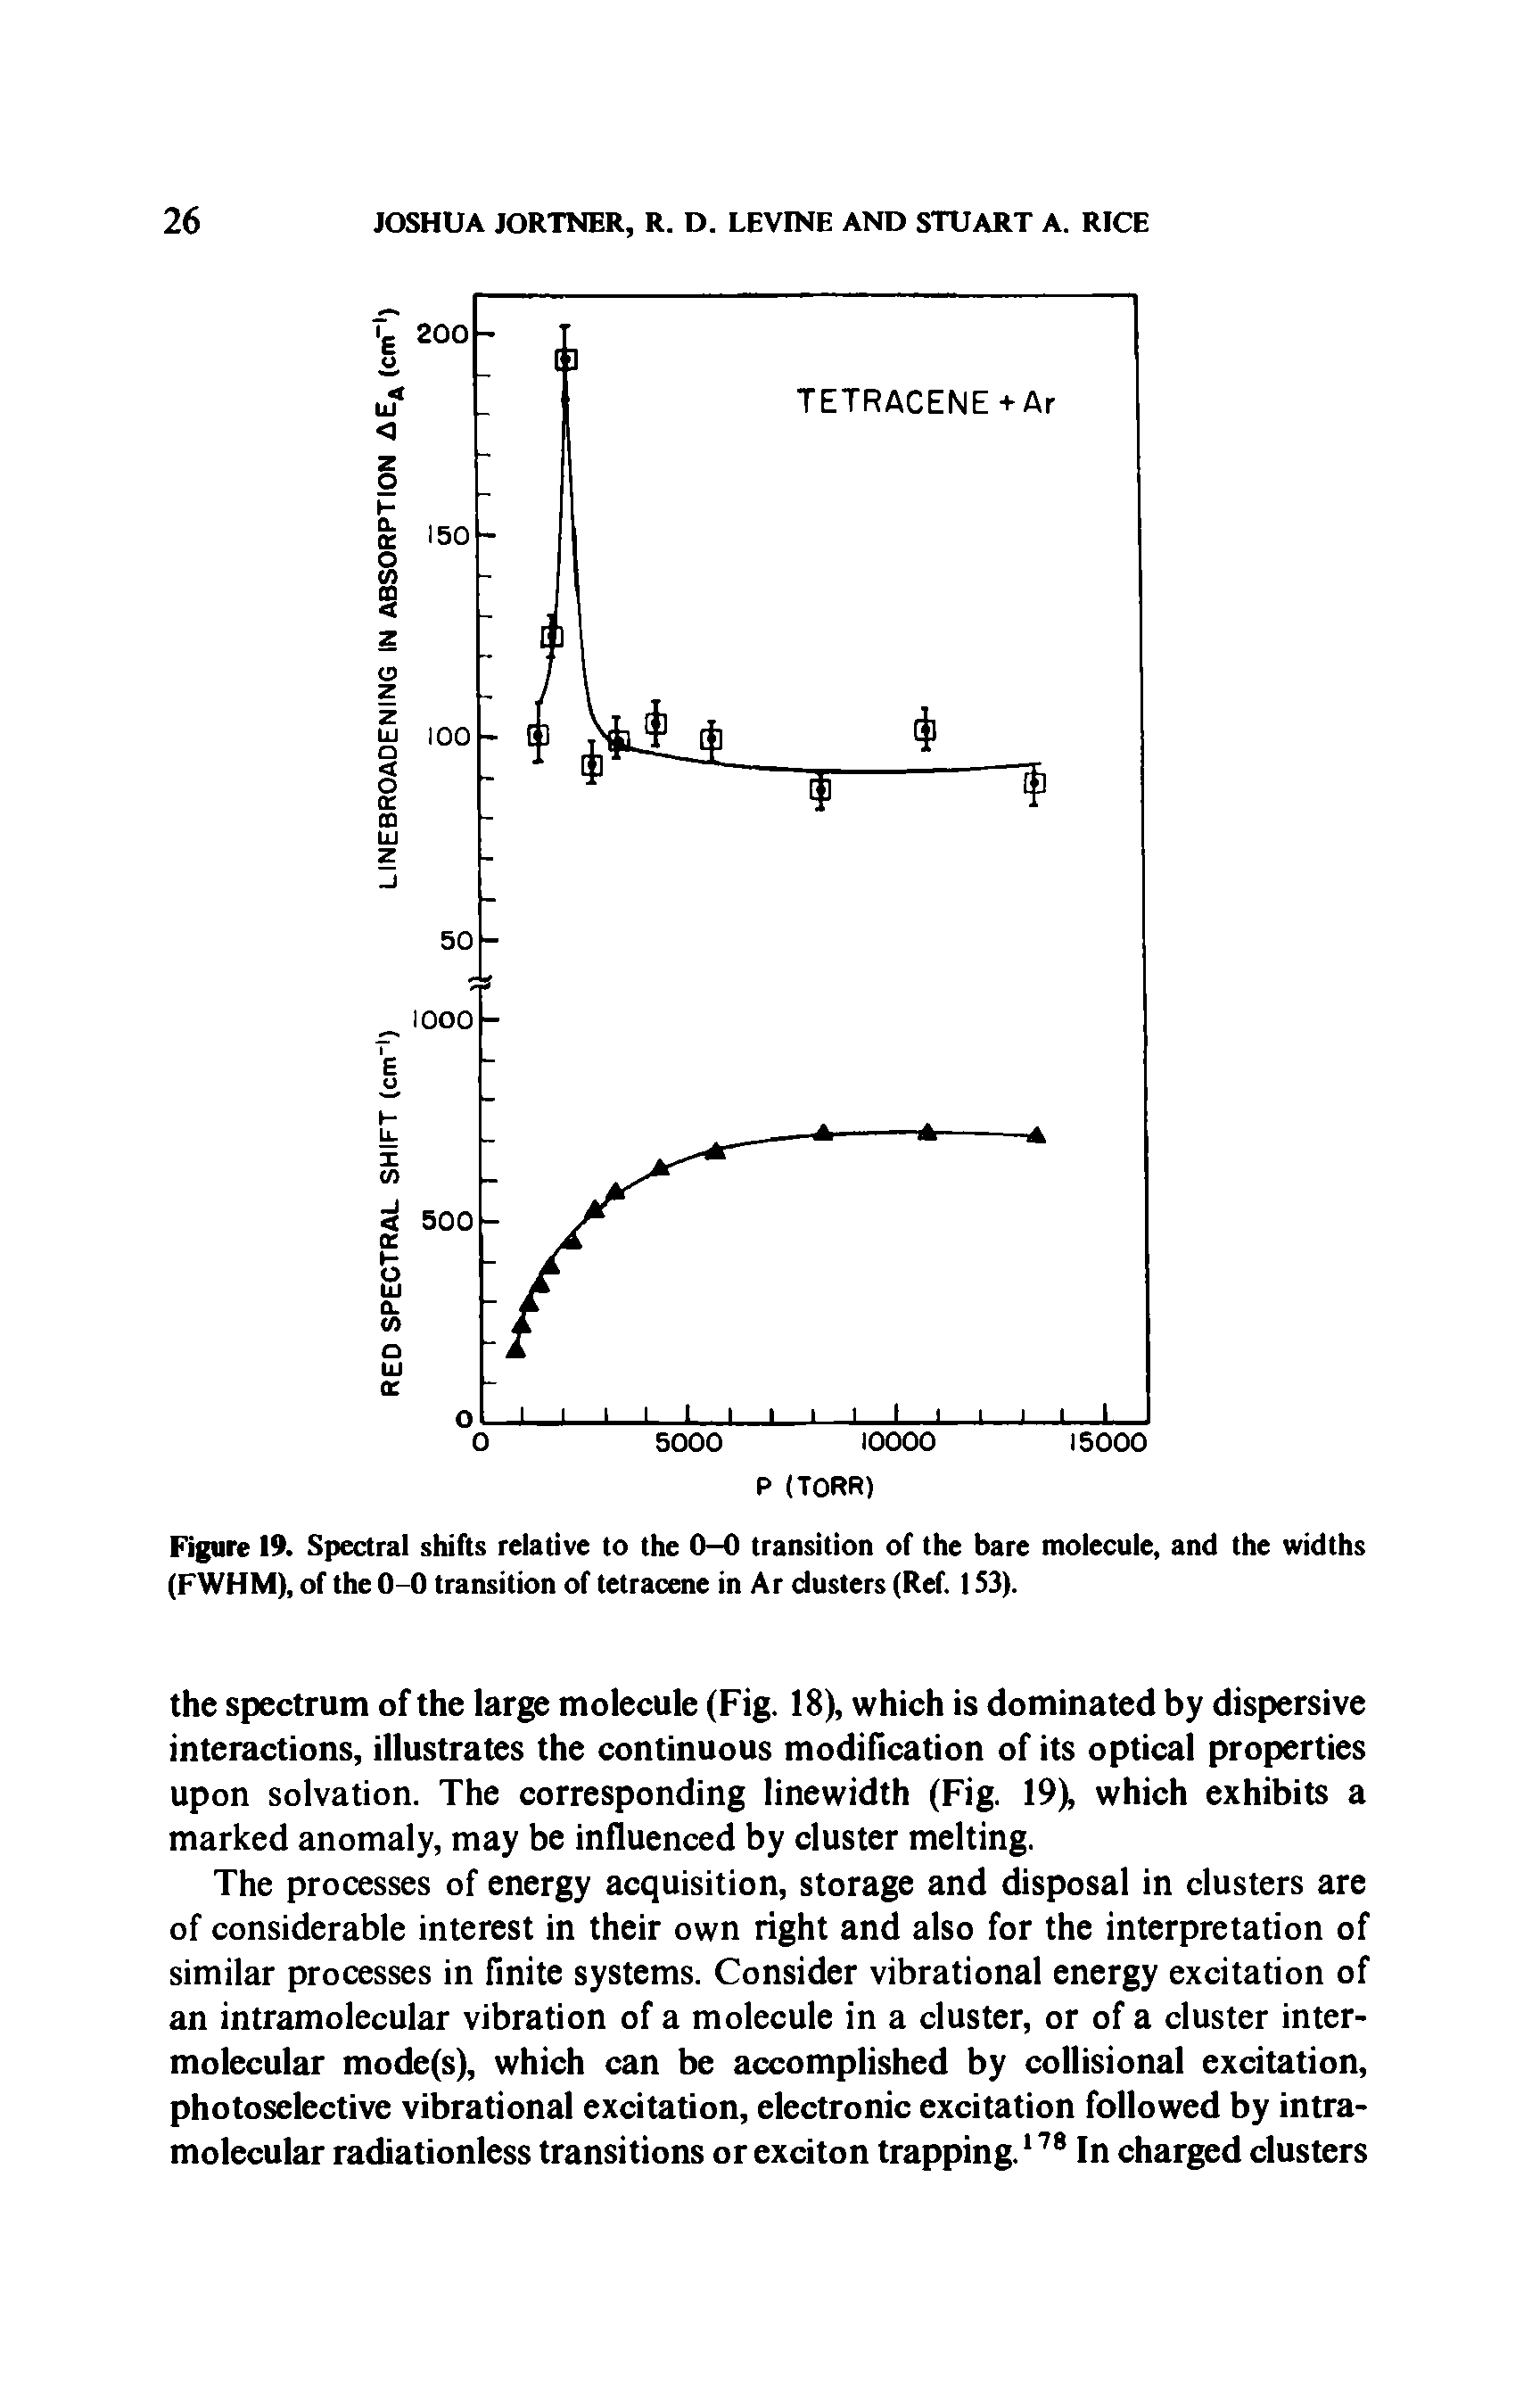 Figure 19. Spectral shifts relative to the 0-0 transition of the bare molecule, and the widths (FWHM), of the 0-0 transition of tetracene in Ar clusters (Ref. 1 S3).